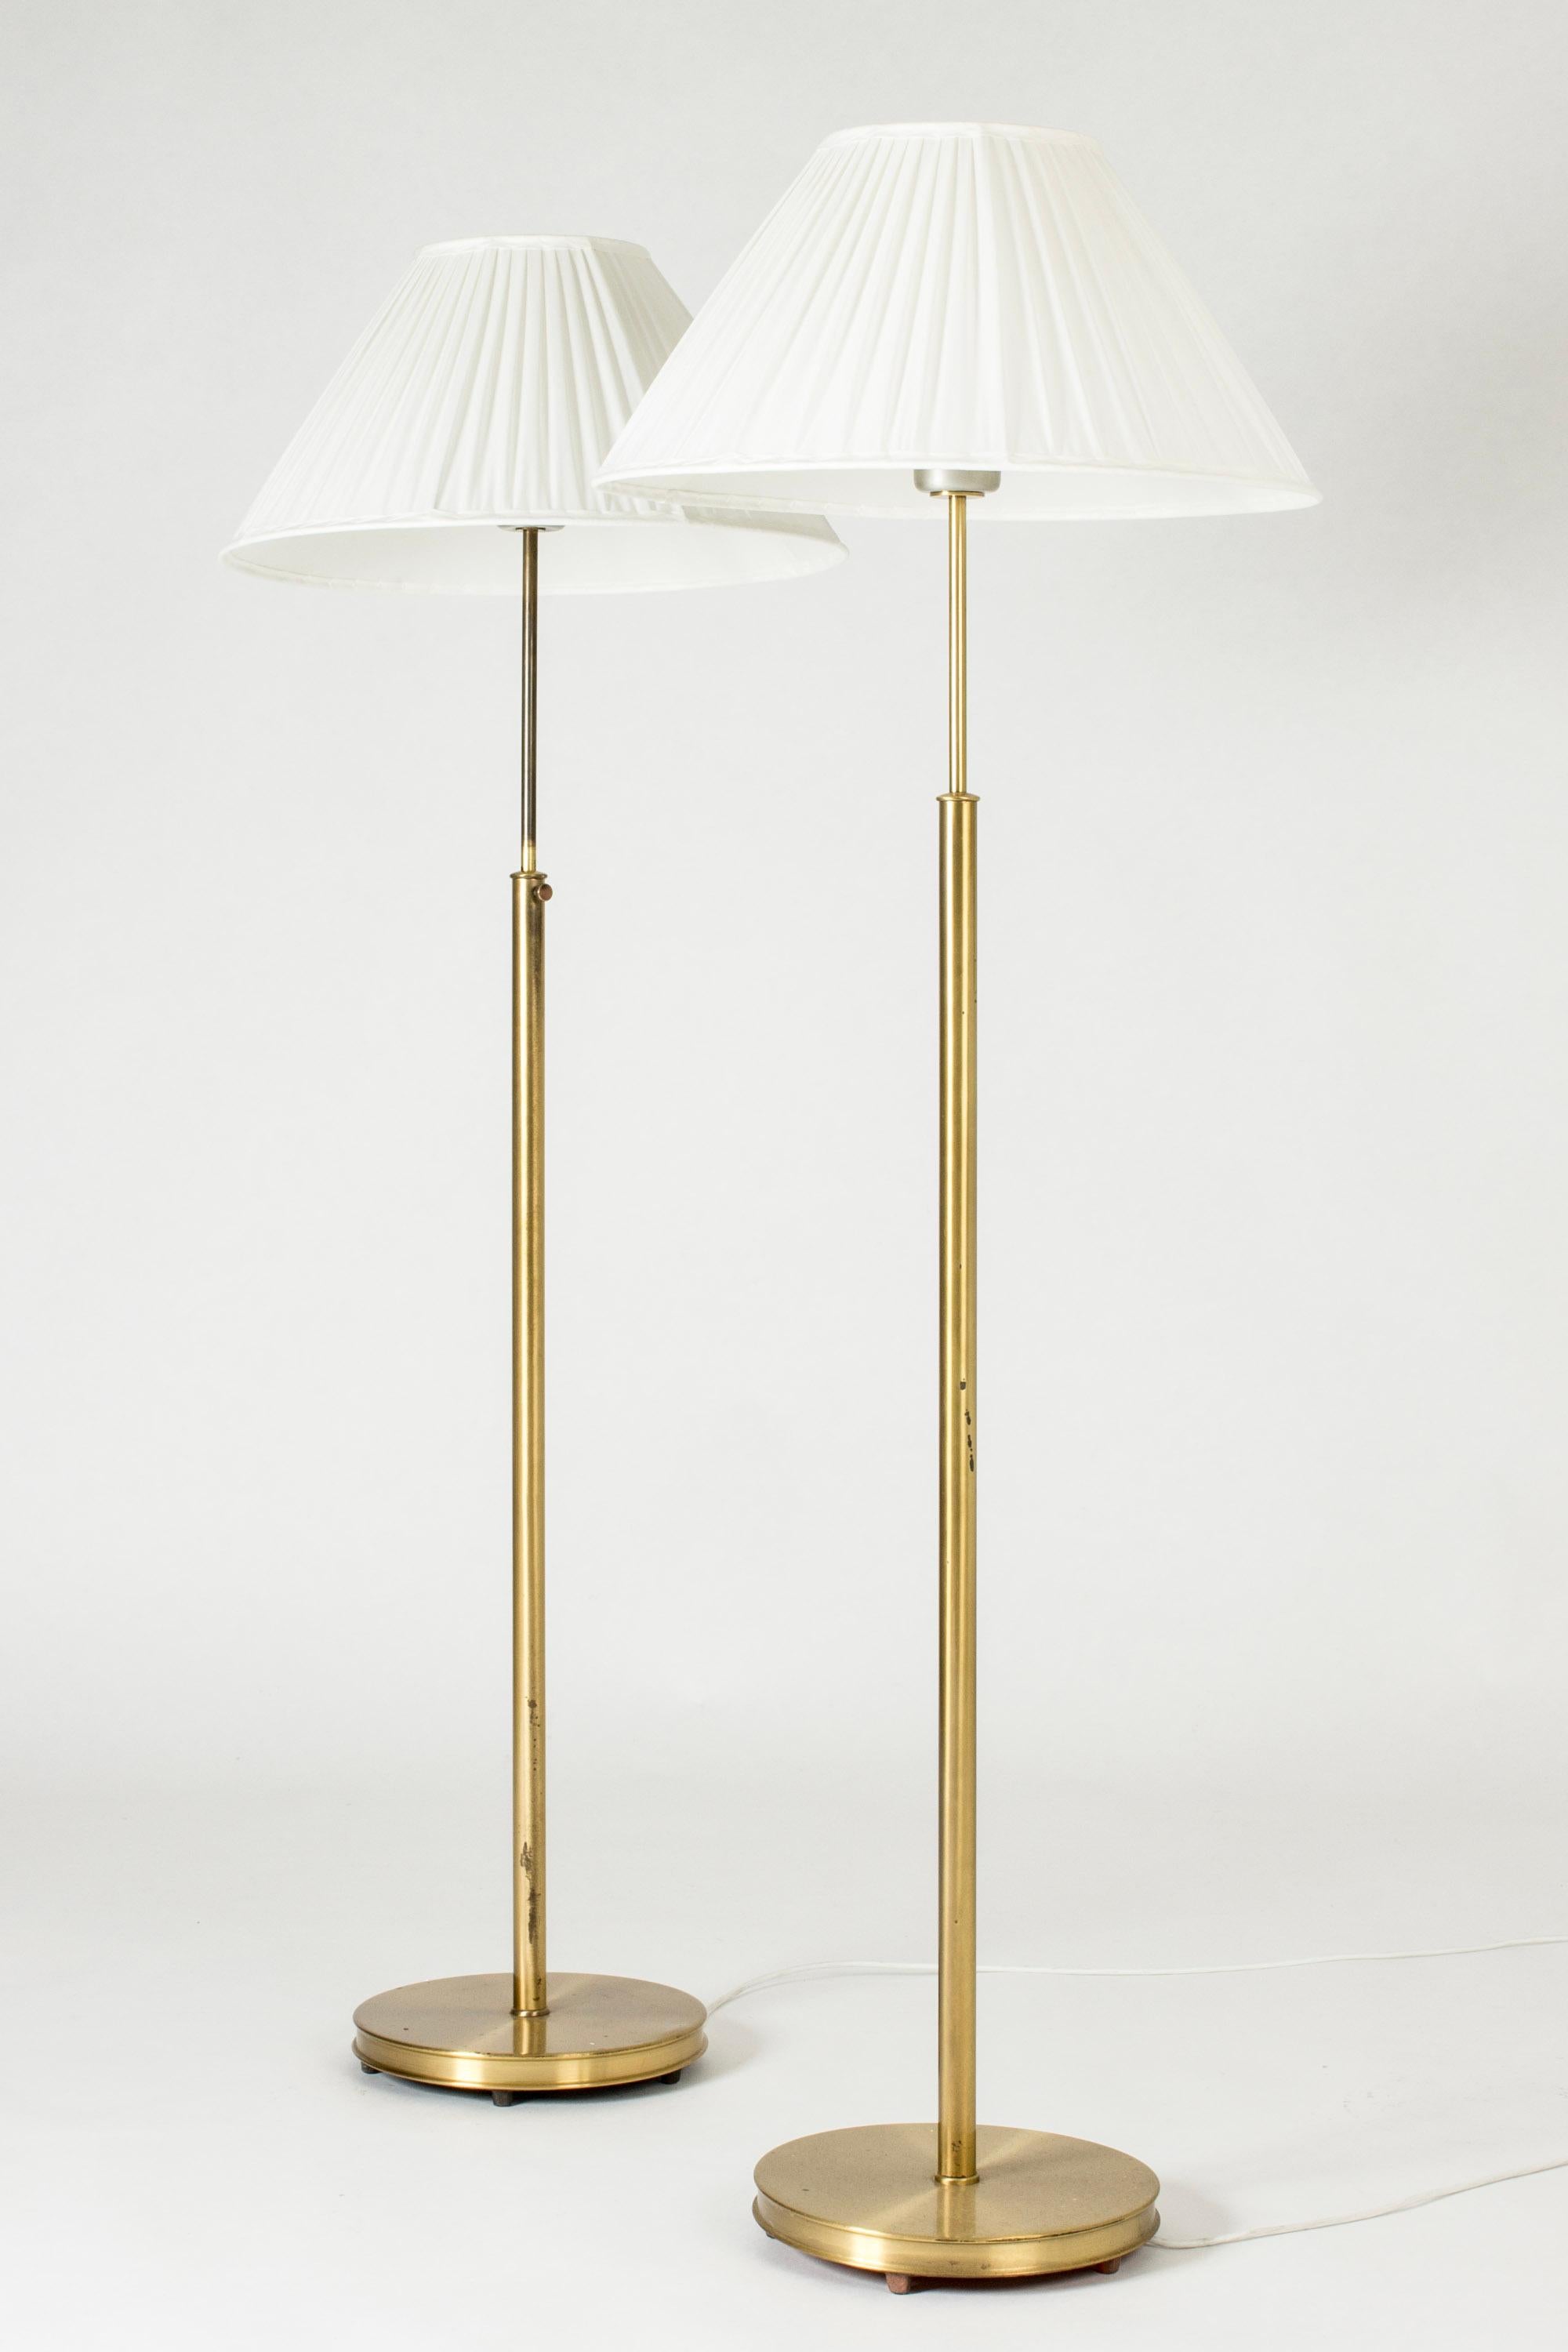 Pair of beautiful brass floor lamps by Josef Frank, made from brass with wide pleated shades. Decorative screws used for adjusting the height. Married couple, small design variation between the stems.